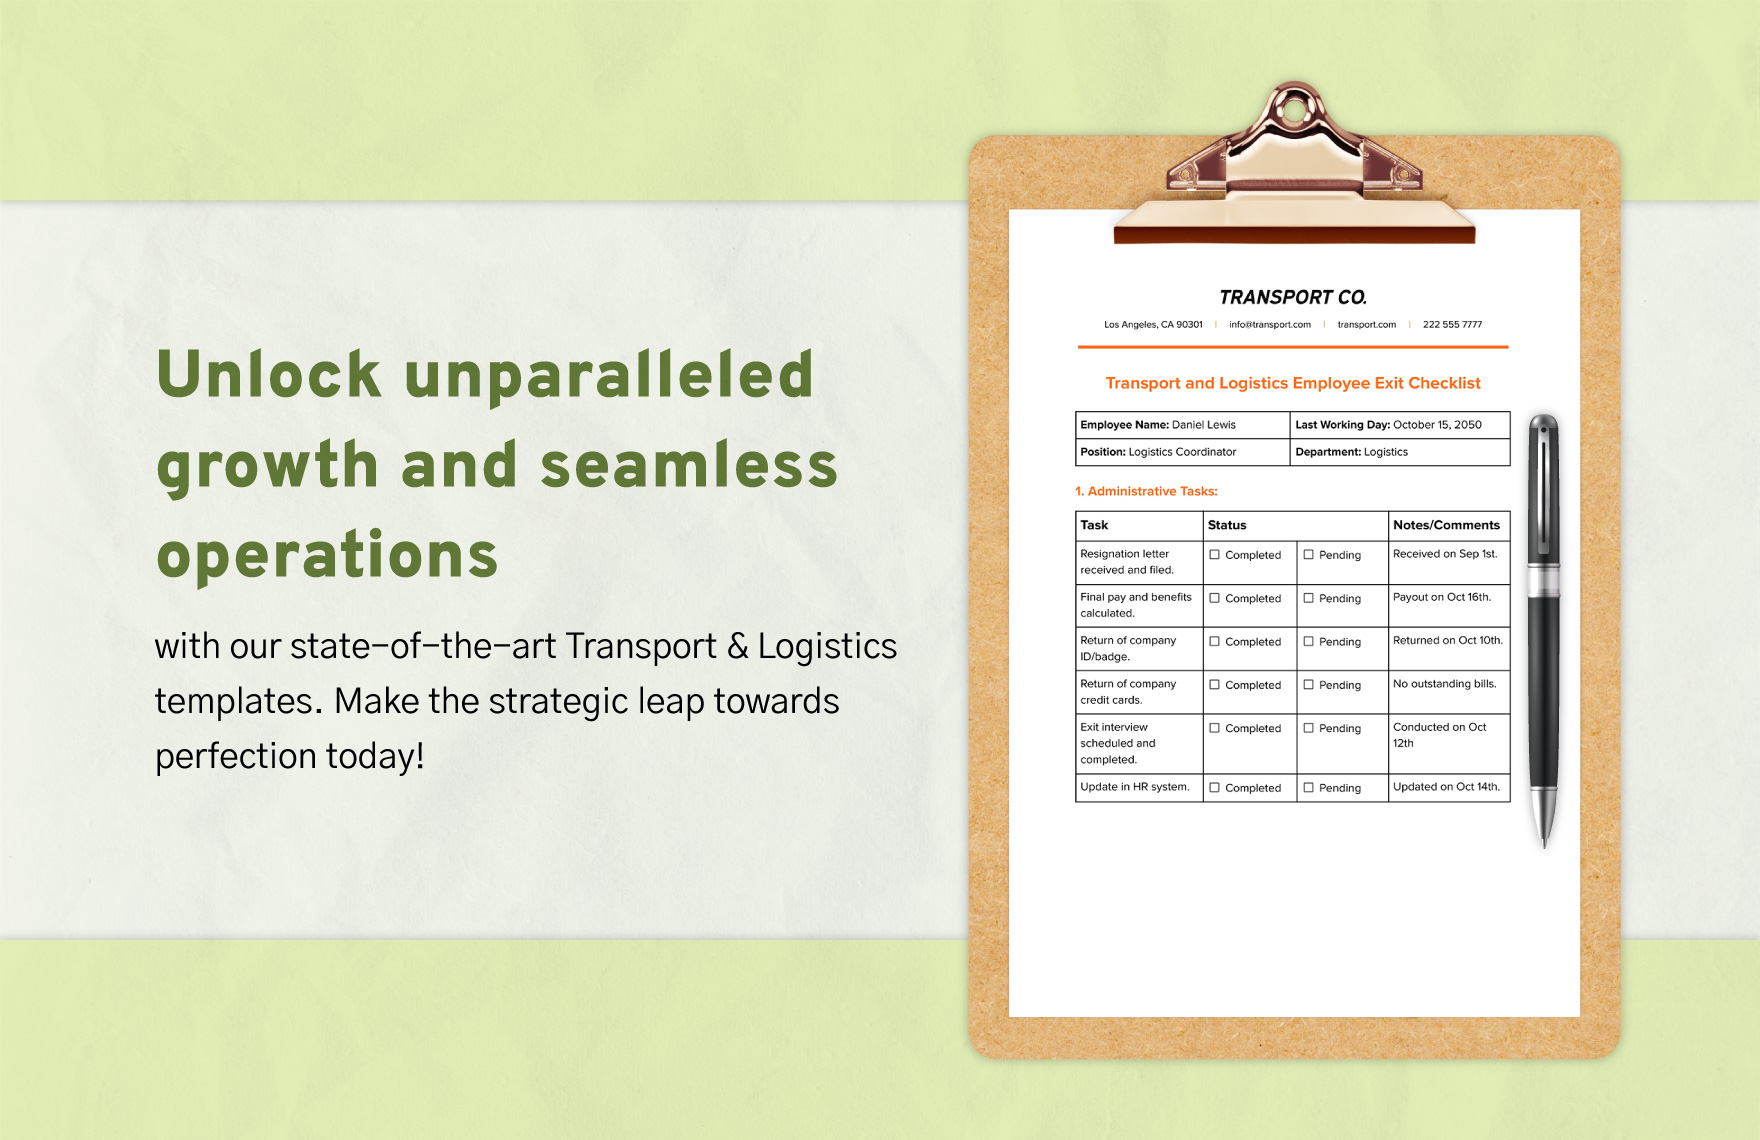 Transport and Logistics Employee Exit Checklist Template